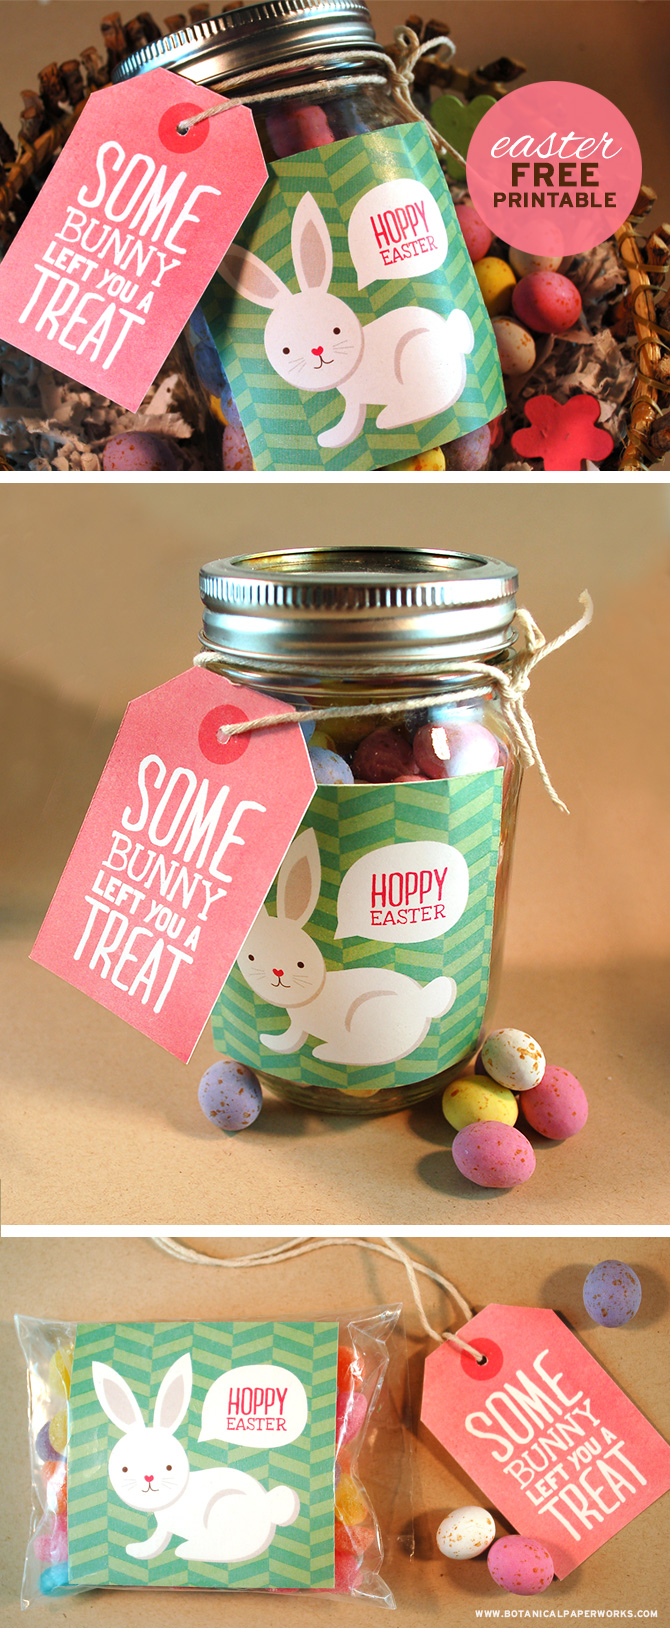 These adorable free printables are a great way to dress up your treat packages for friends and family this Easter.  